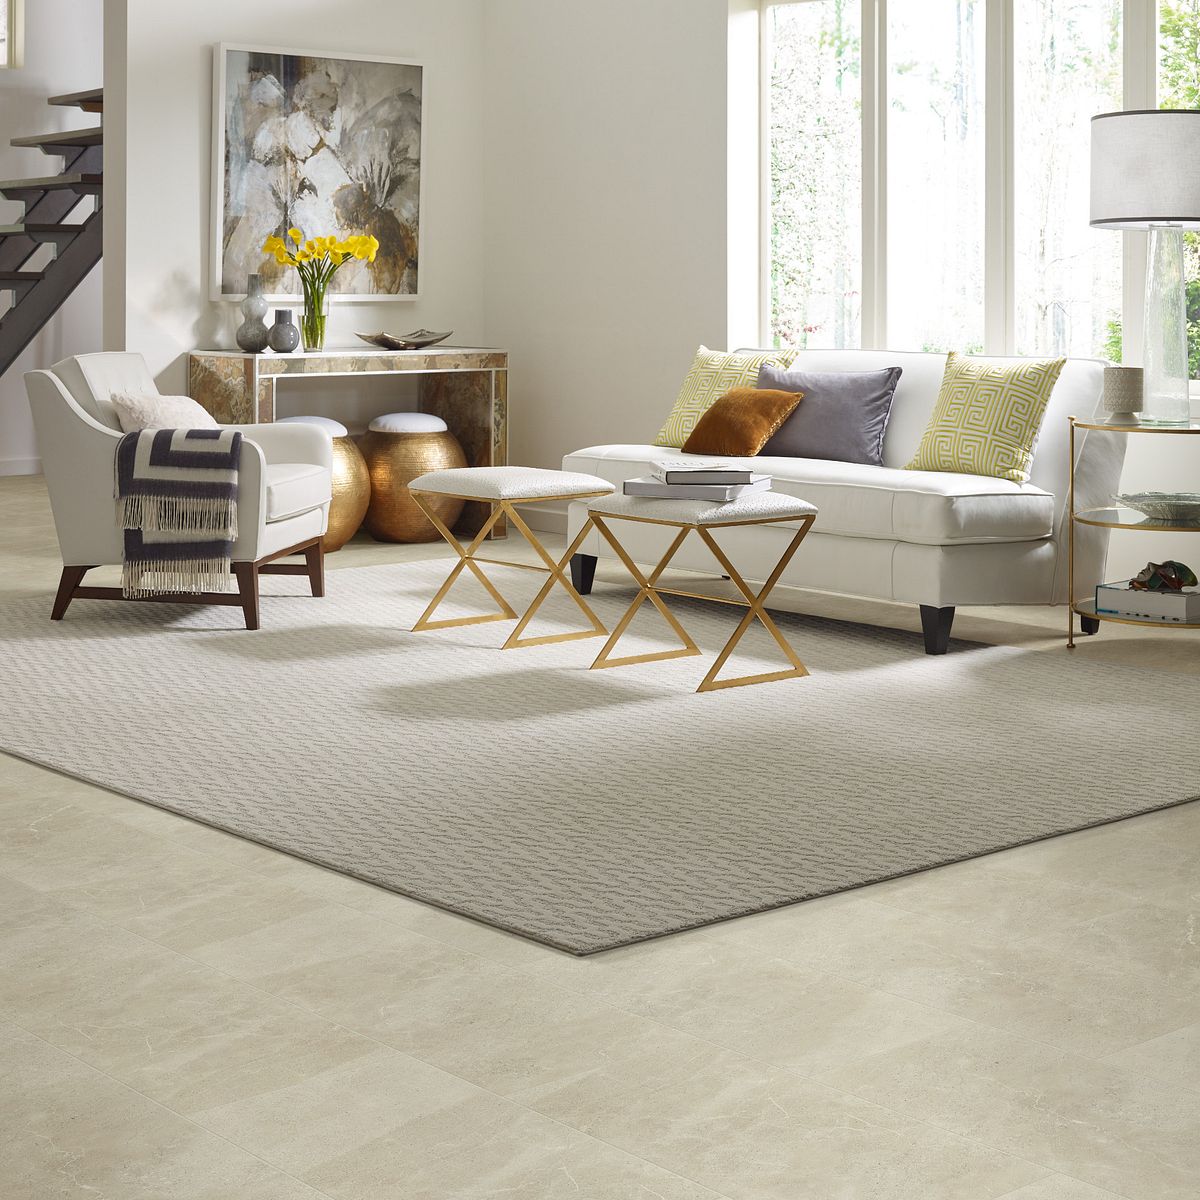 Flooring 101 From Floor Cleaning, Shaw Living Area Rugs